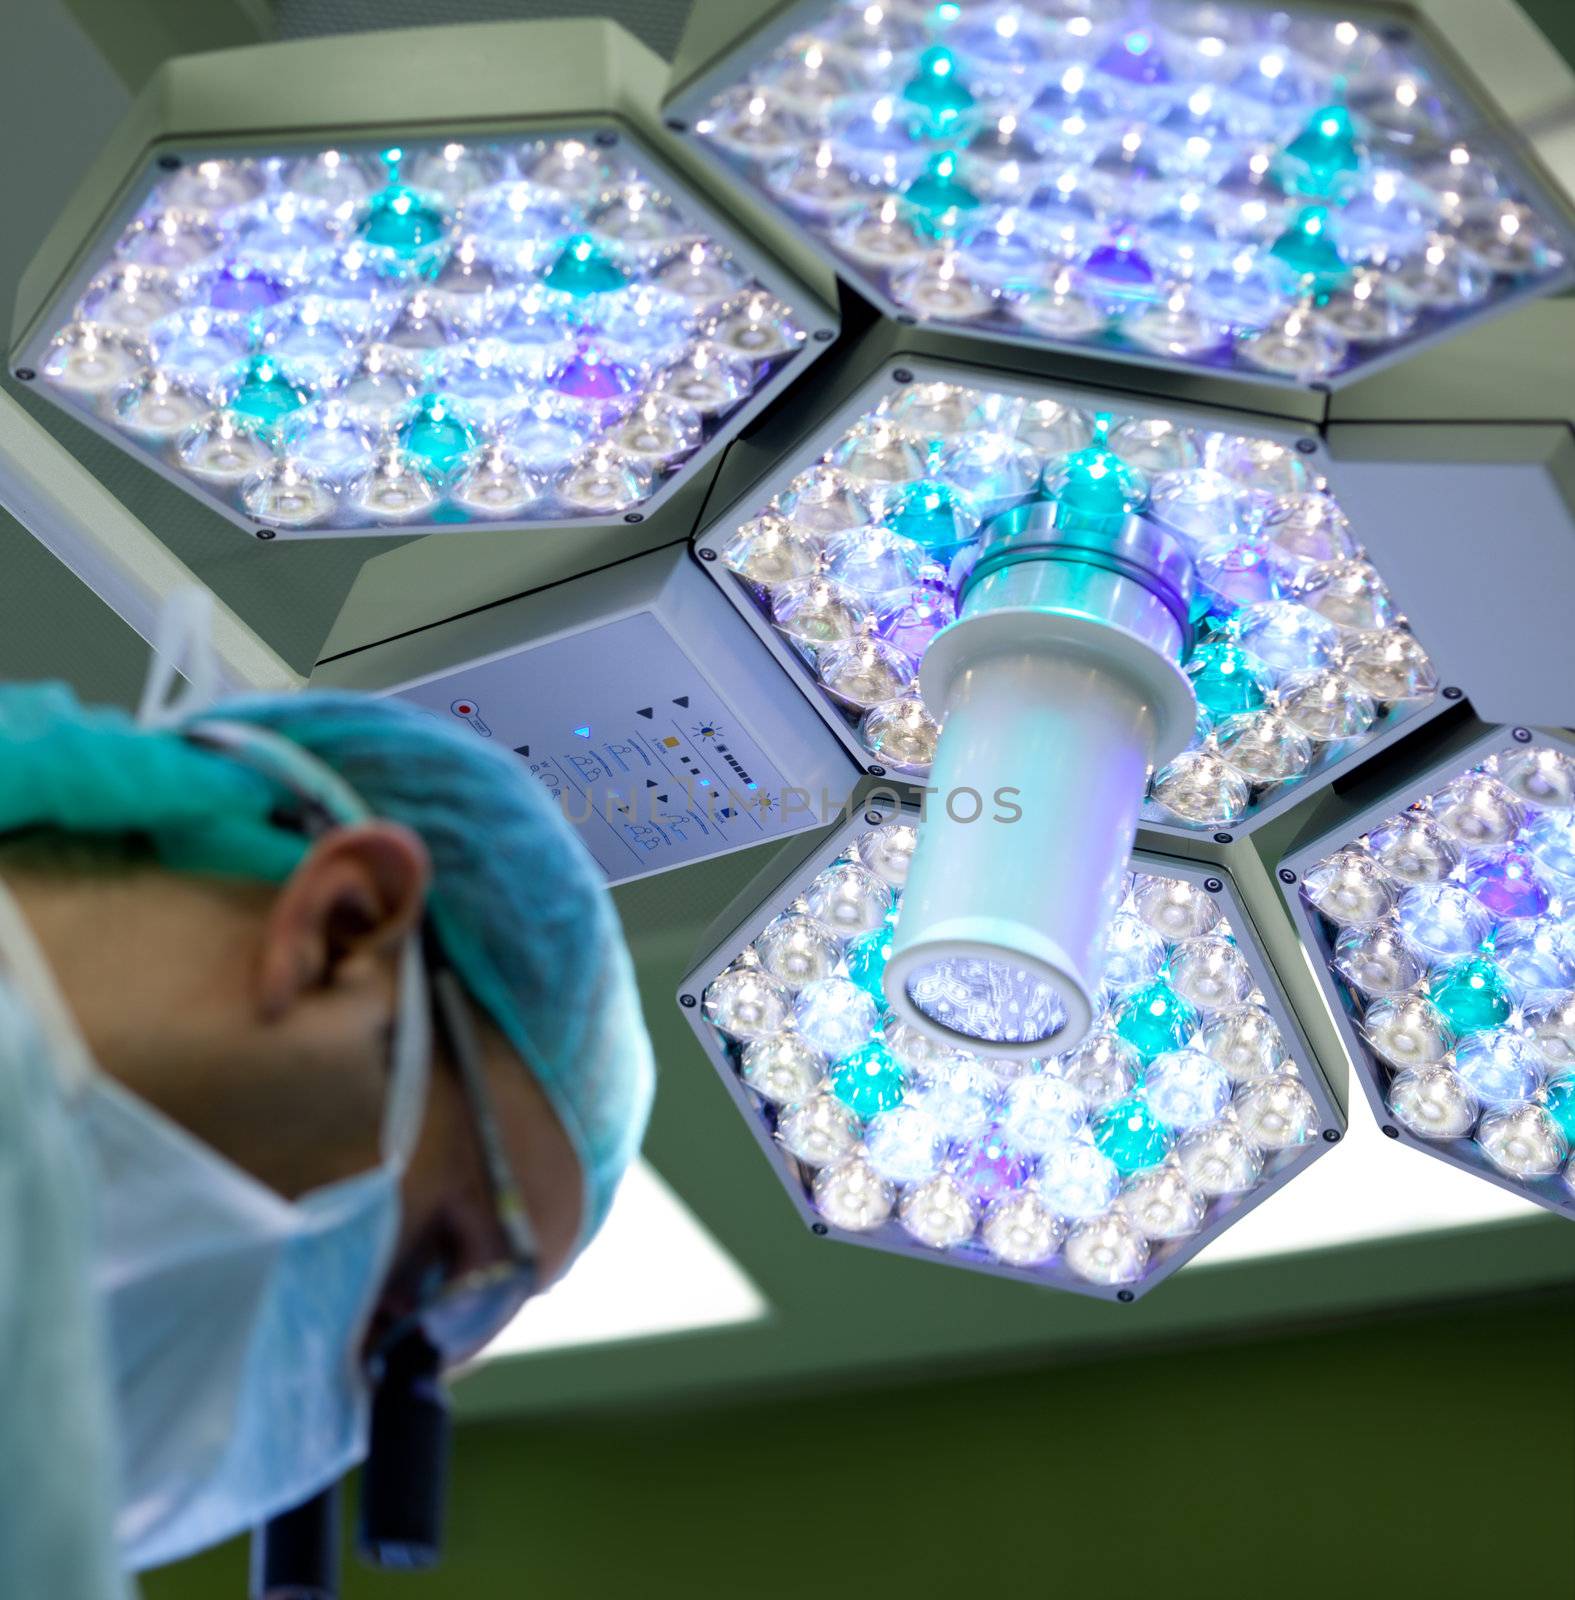 surgeon working under big diode lamp in operating room, focus on lamp